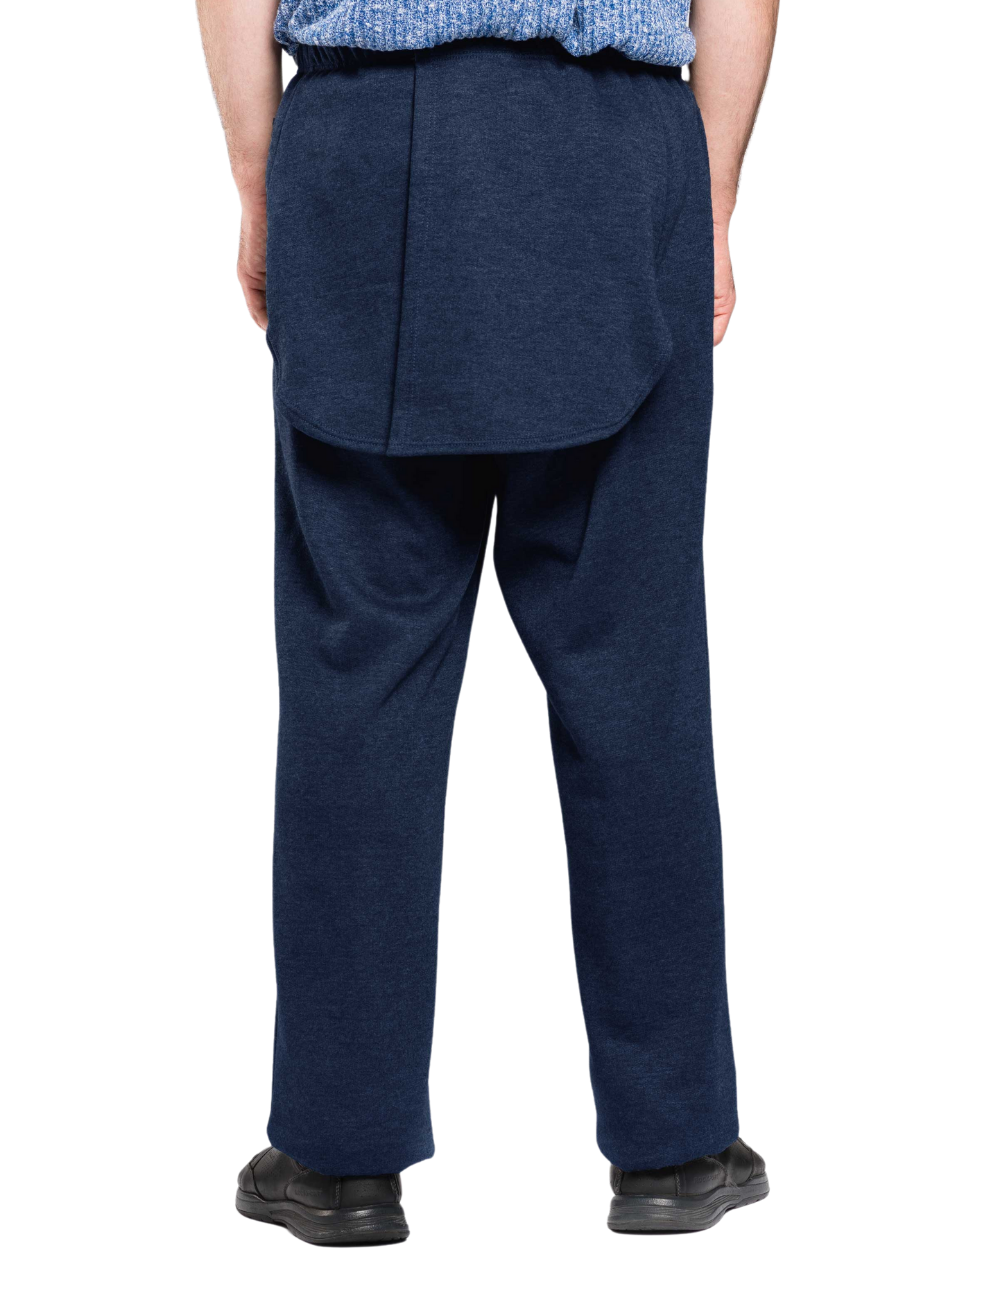 Buy Regular Fit Men Trousers Royal Blue and Navy Blue Combo of 2 Polyester  Blend for Best Price, Reviews, Free Shipping